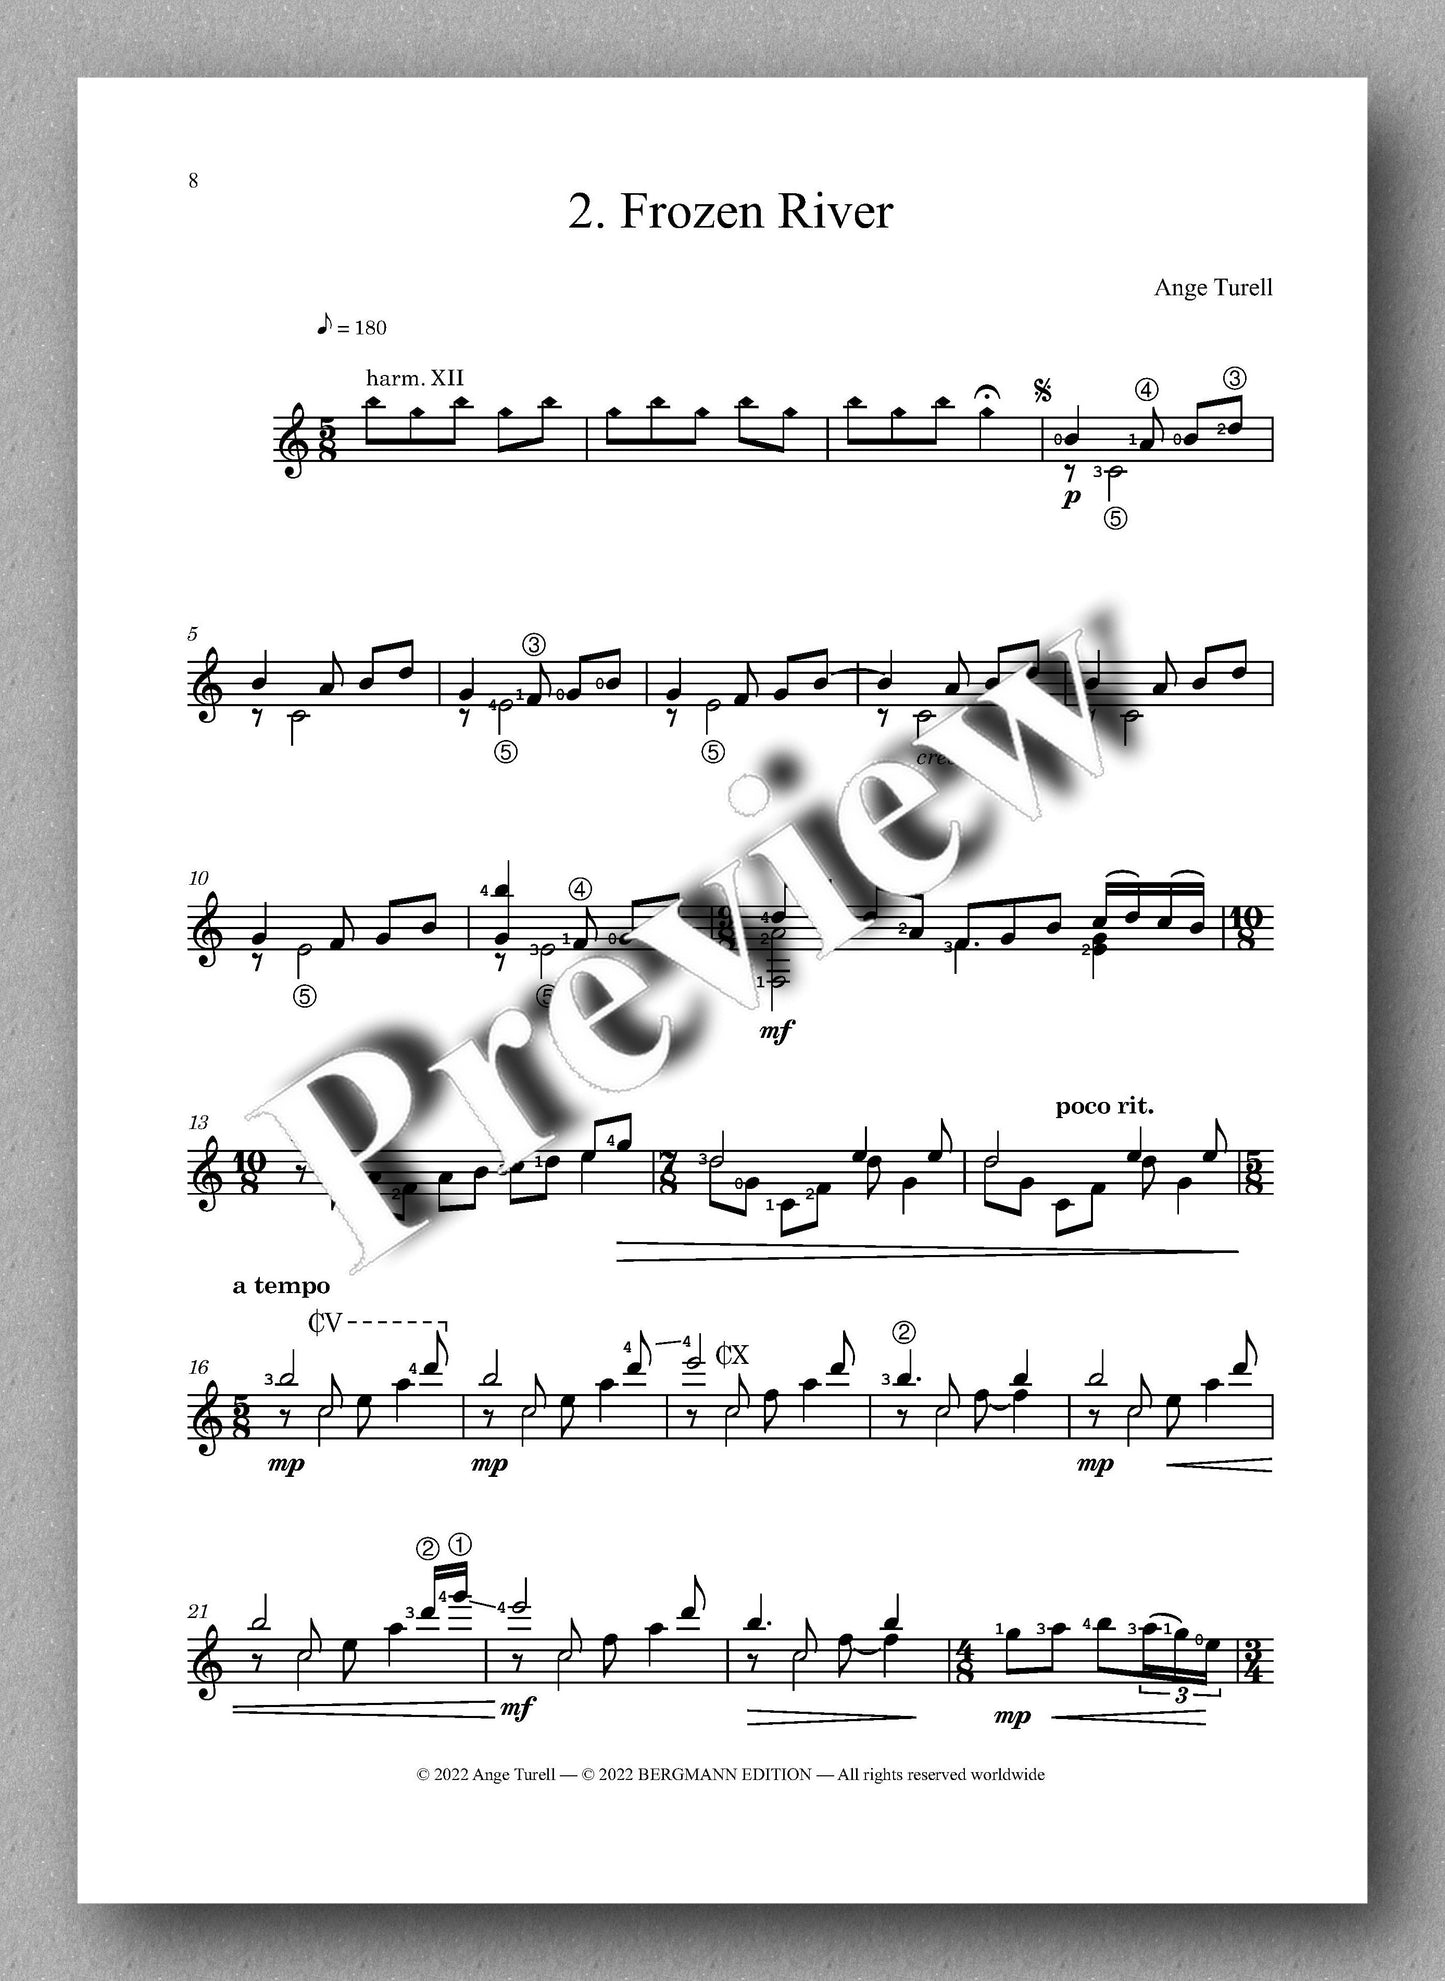 Ange Turell, Snow Poems - preview of the music score 2